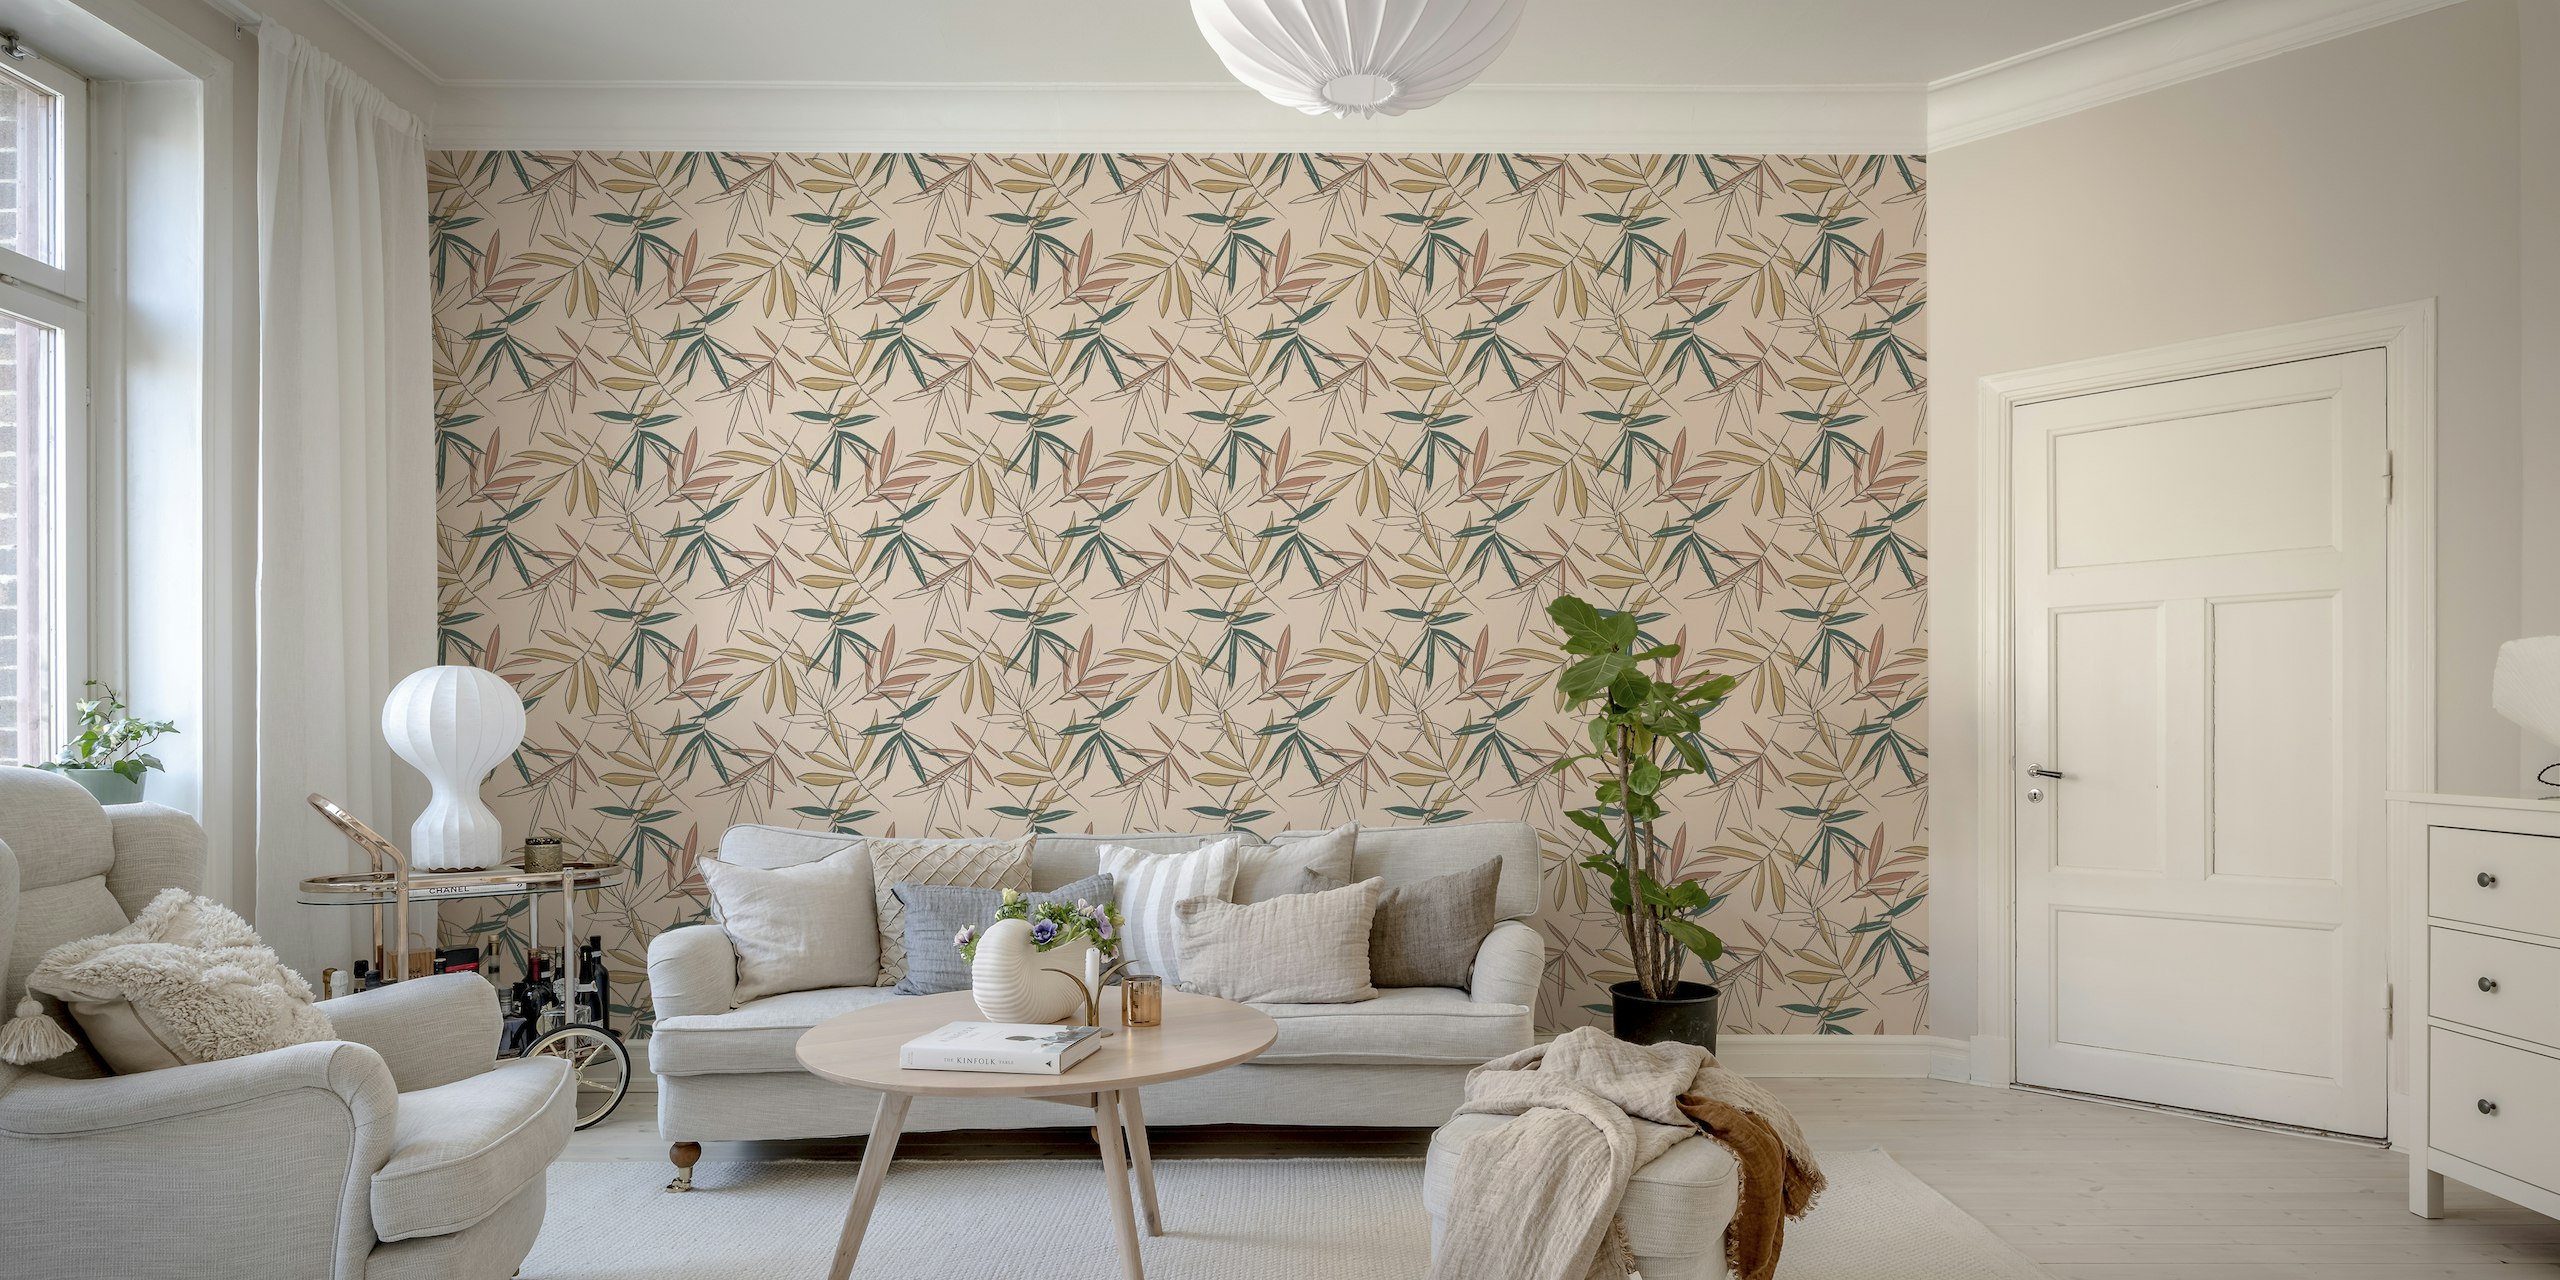 Vintage Palms Wall Mural with elegant palm fronds in muted colors